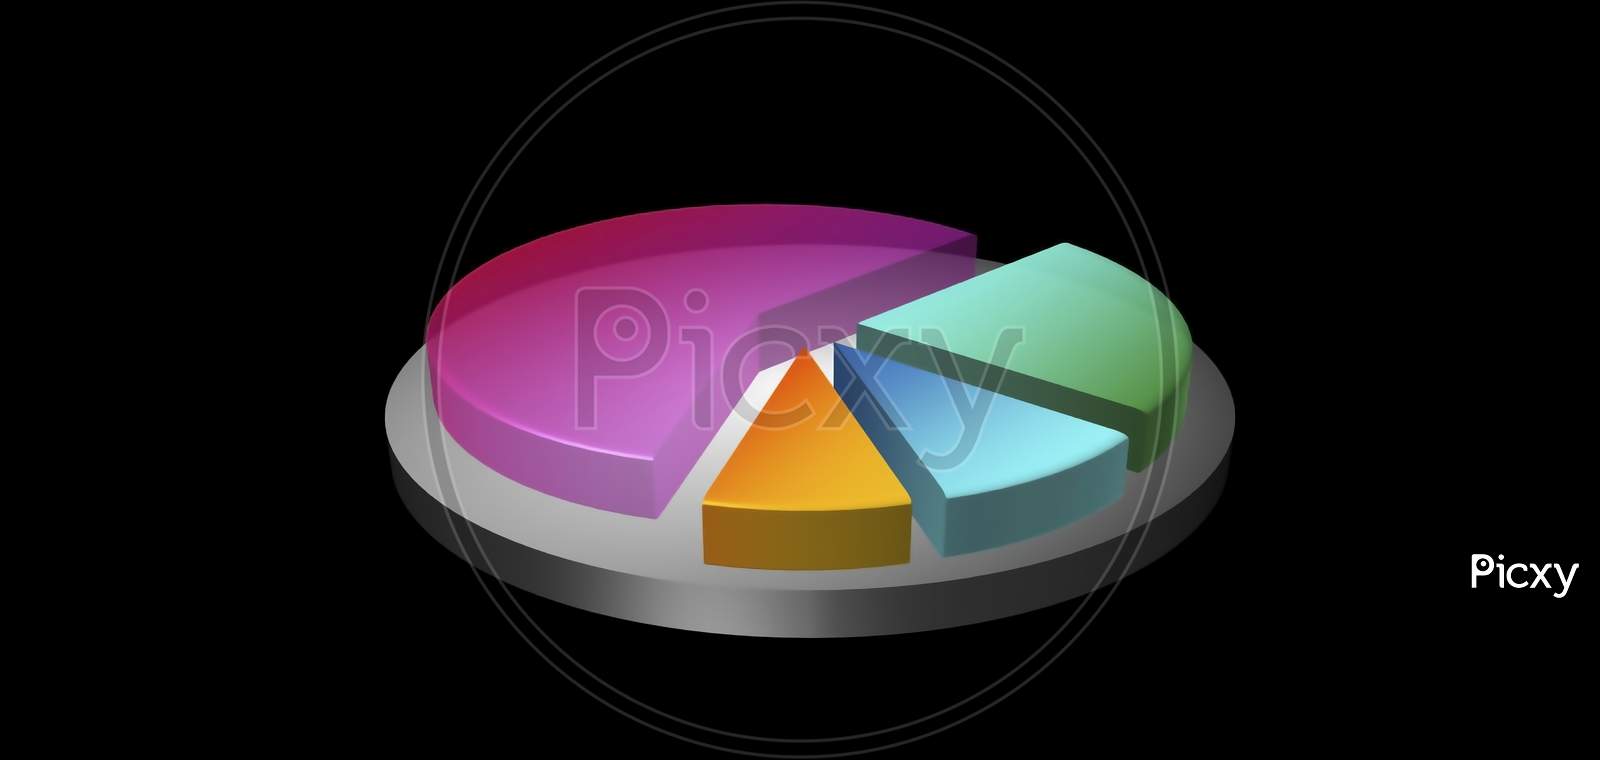 3D Pie Chart With Four Different Gradient Color Ready For Attach Information On A Black Background .Concept For Business And Technology .